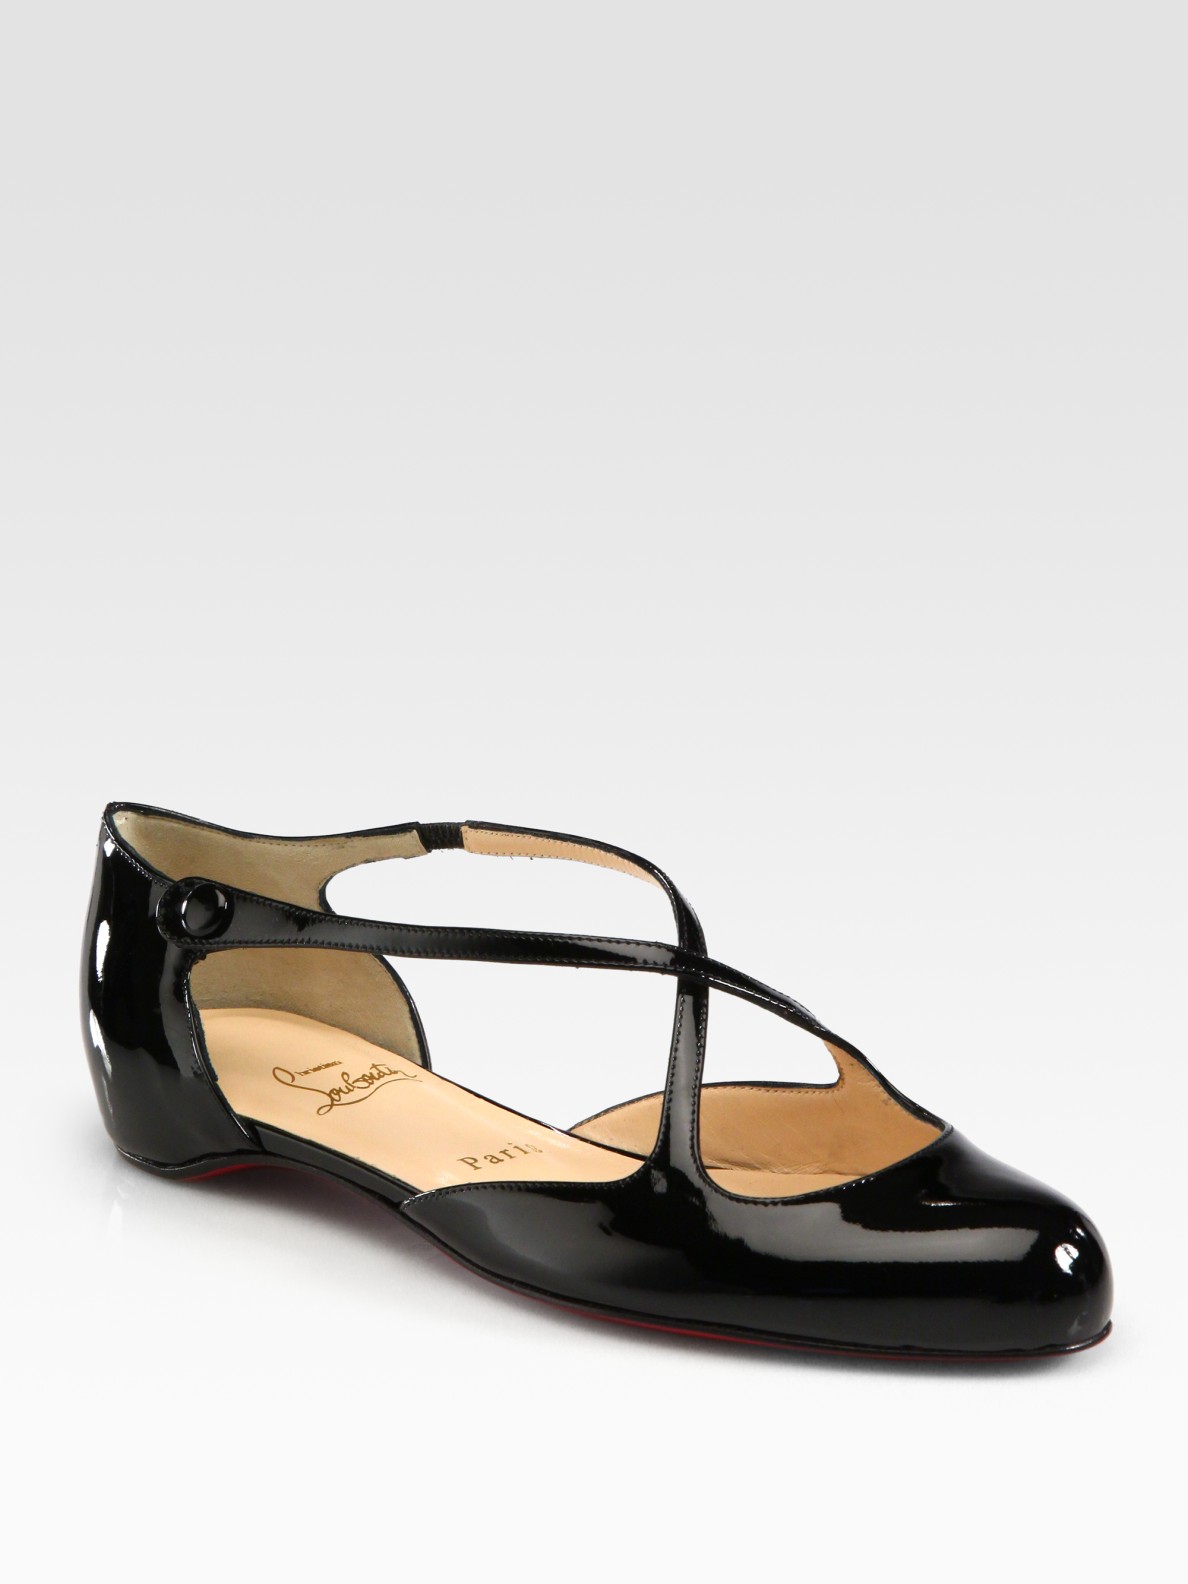 Christian Louboutin Pneumatica Patent Leather Mary Jane Flats in Black |  Lyst